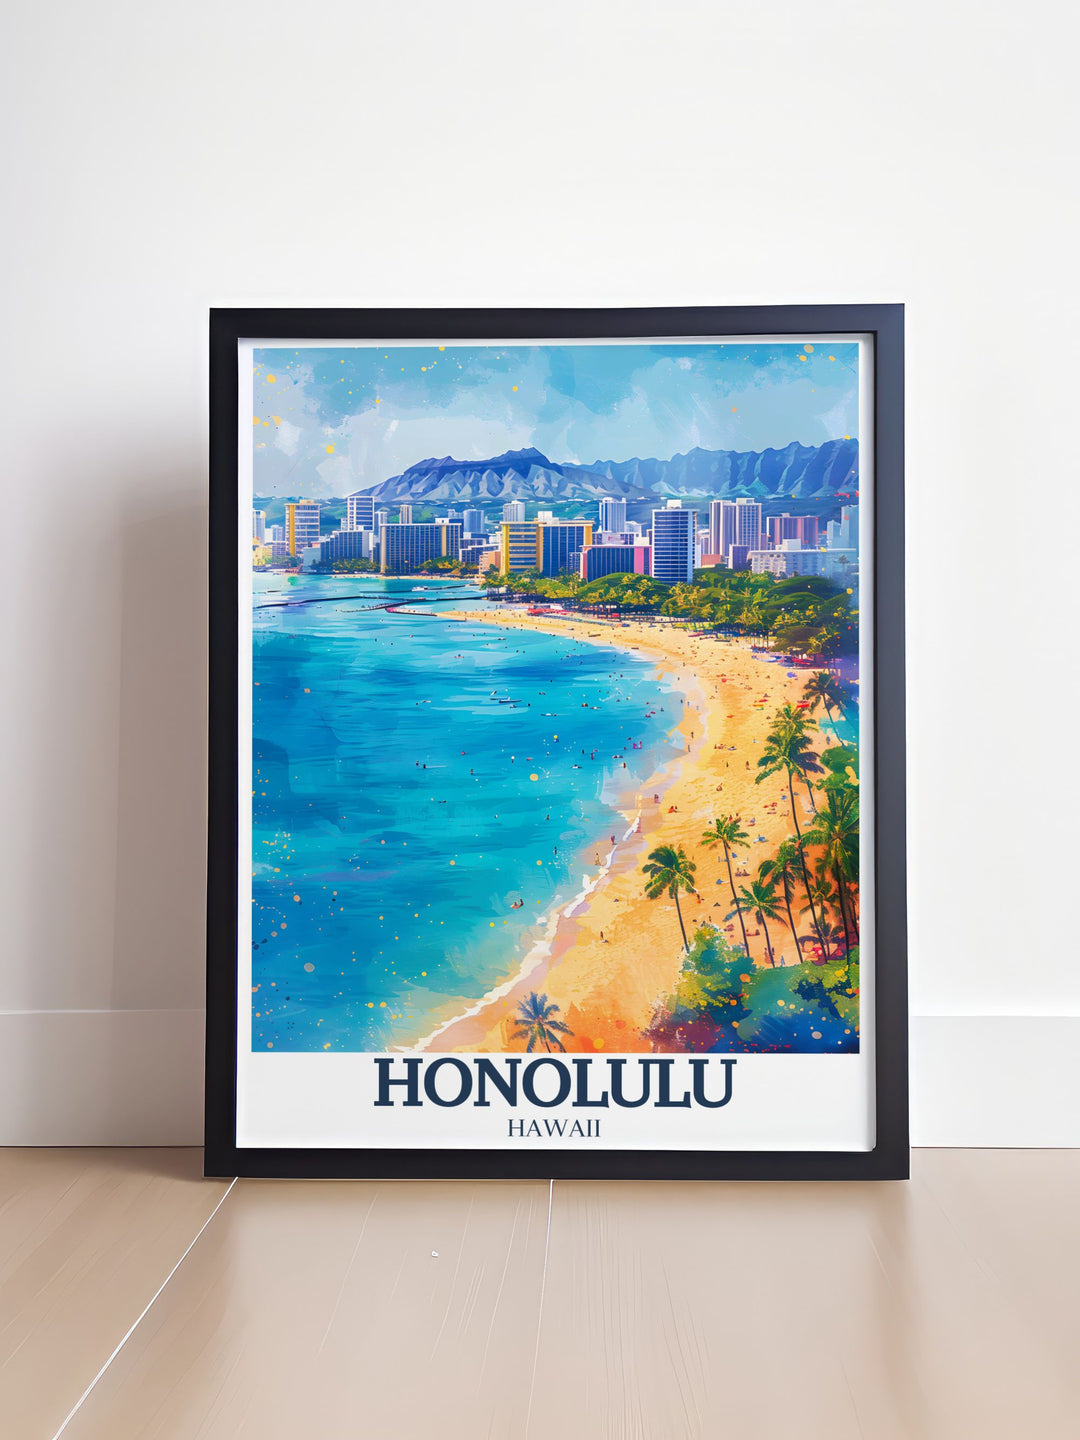 Home decor print showcasing the majestic Diamond Head Crater in Honolulu, Hawaii. The artwork highlights the craters geological wonder and panoramic views, bringing the essence of Hawaiis natural beauty into your home.